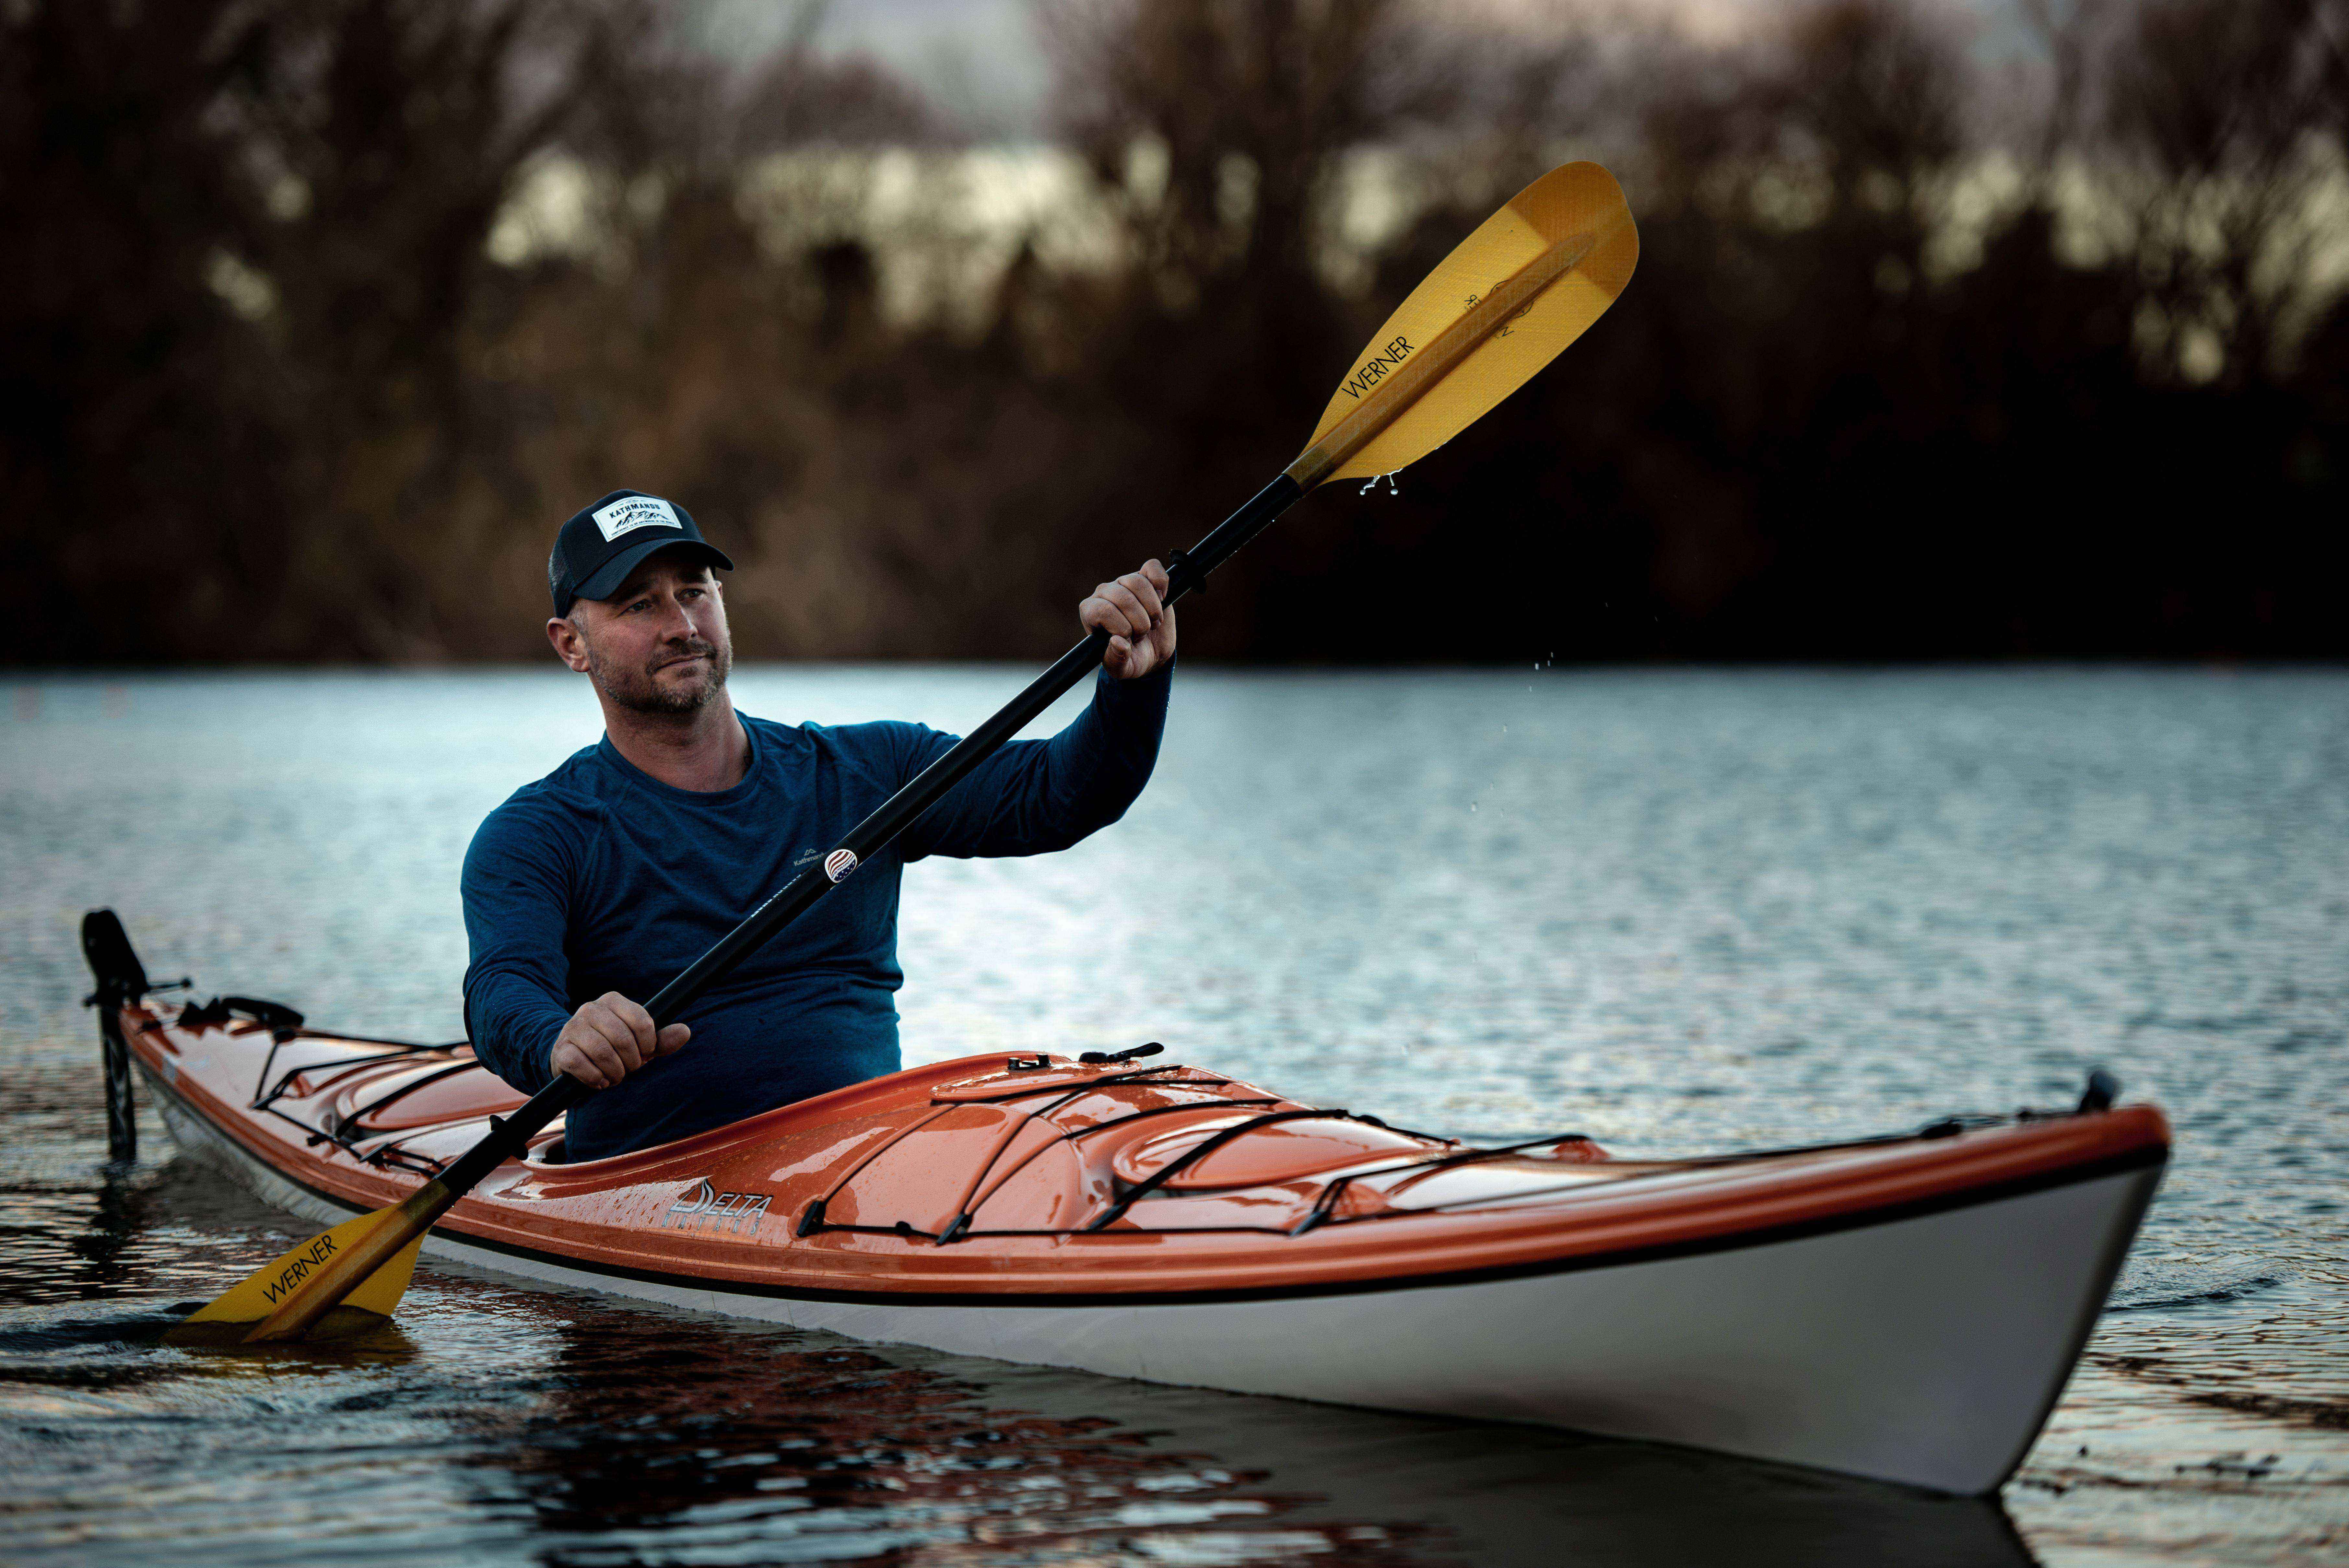 Alone with my thoughts: One man's solo expedition causing a ripple effect